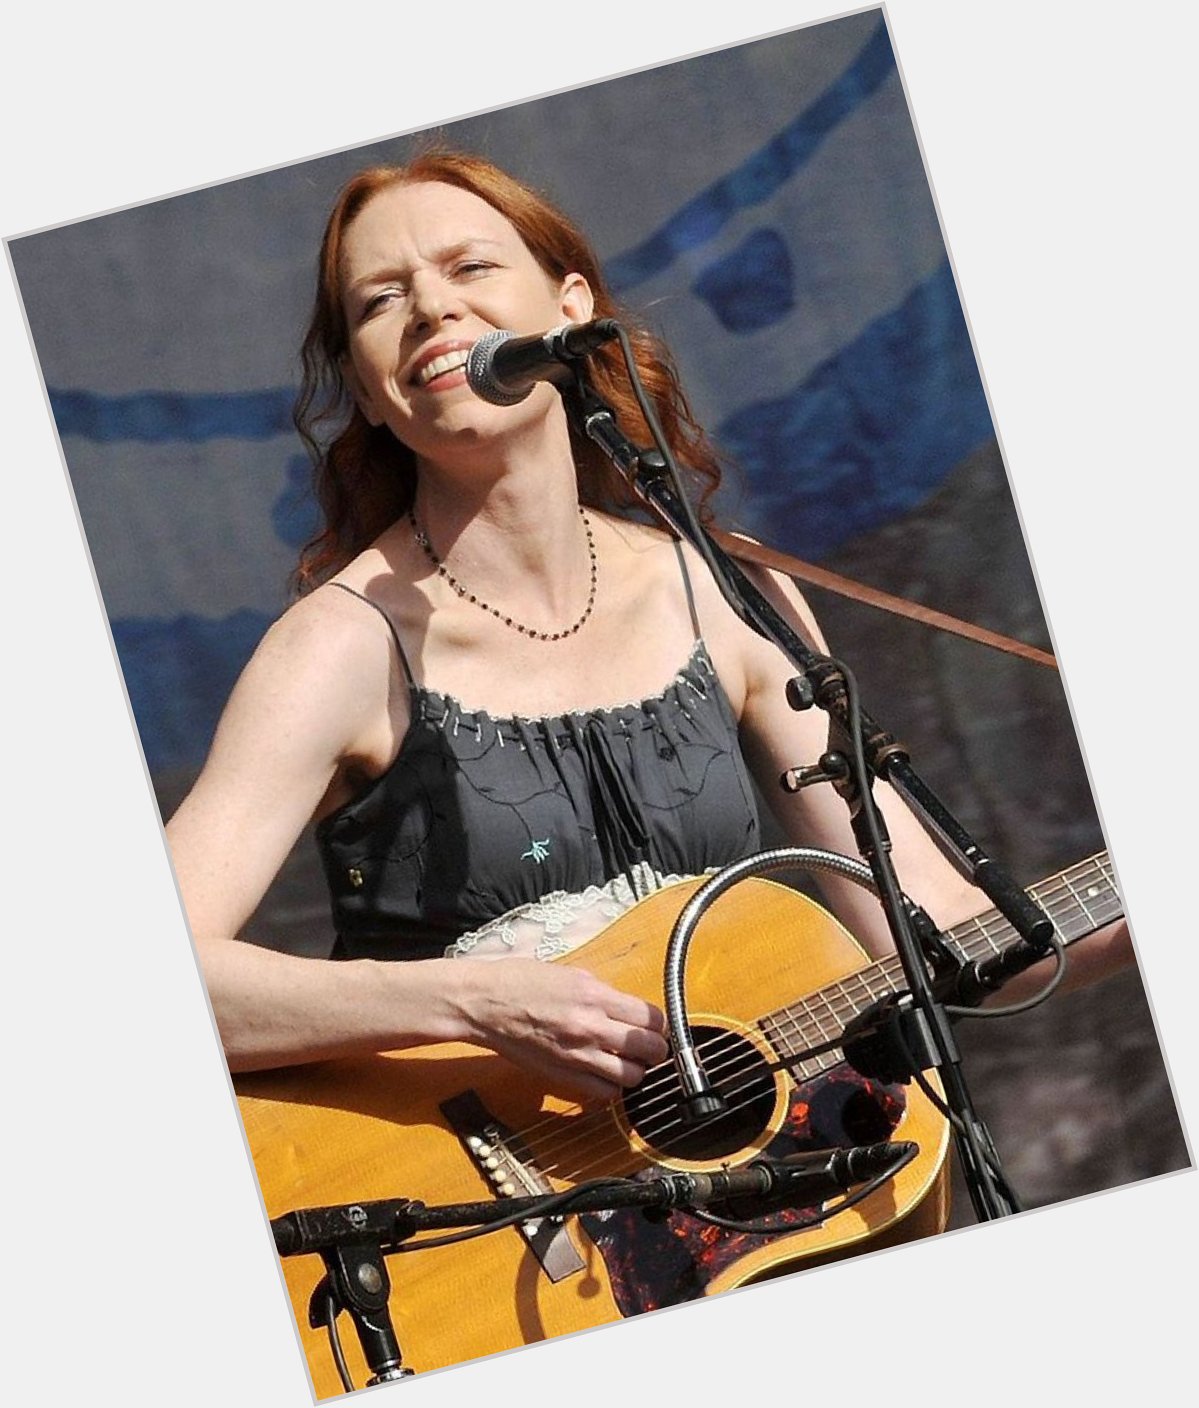 Happy Birthday to singer songwriter Gillian Welch, born on this day in New York City in 1967.   